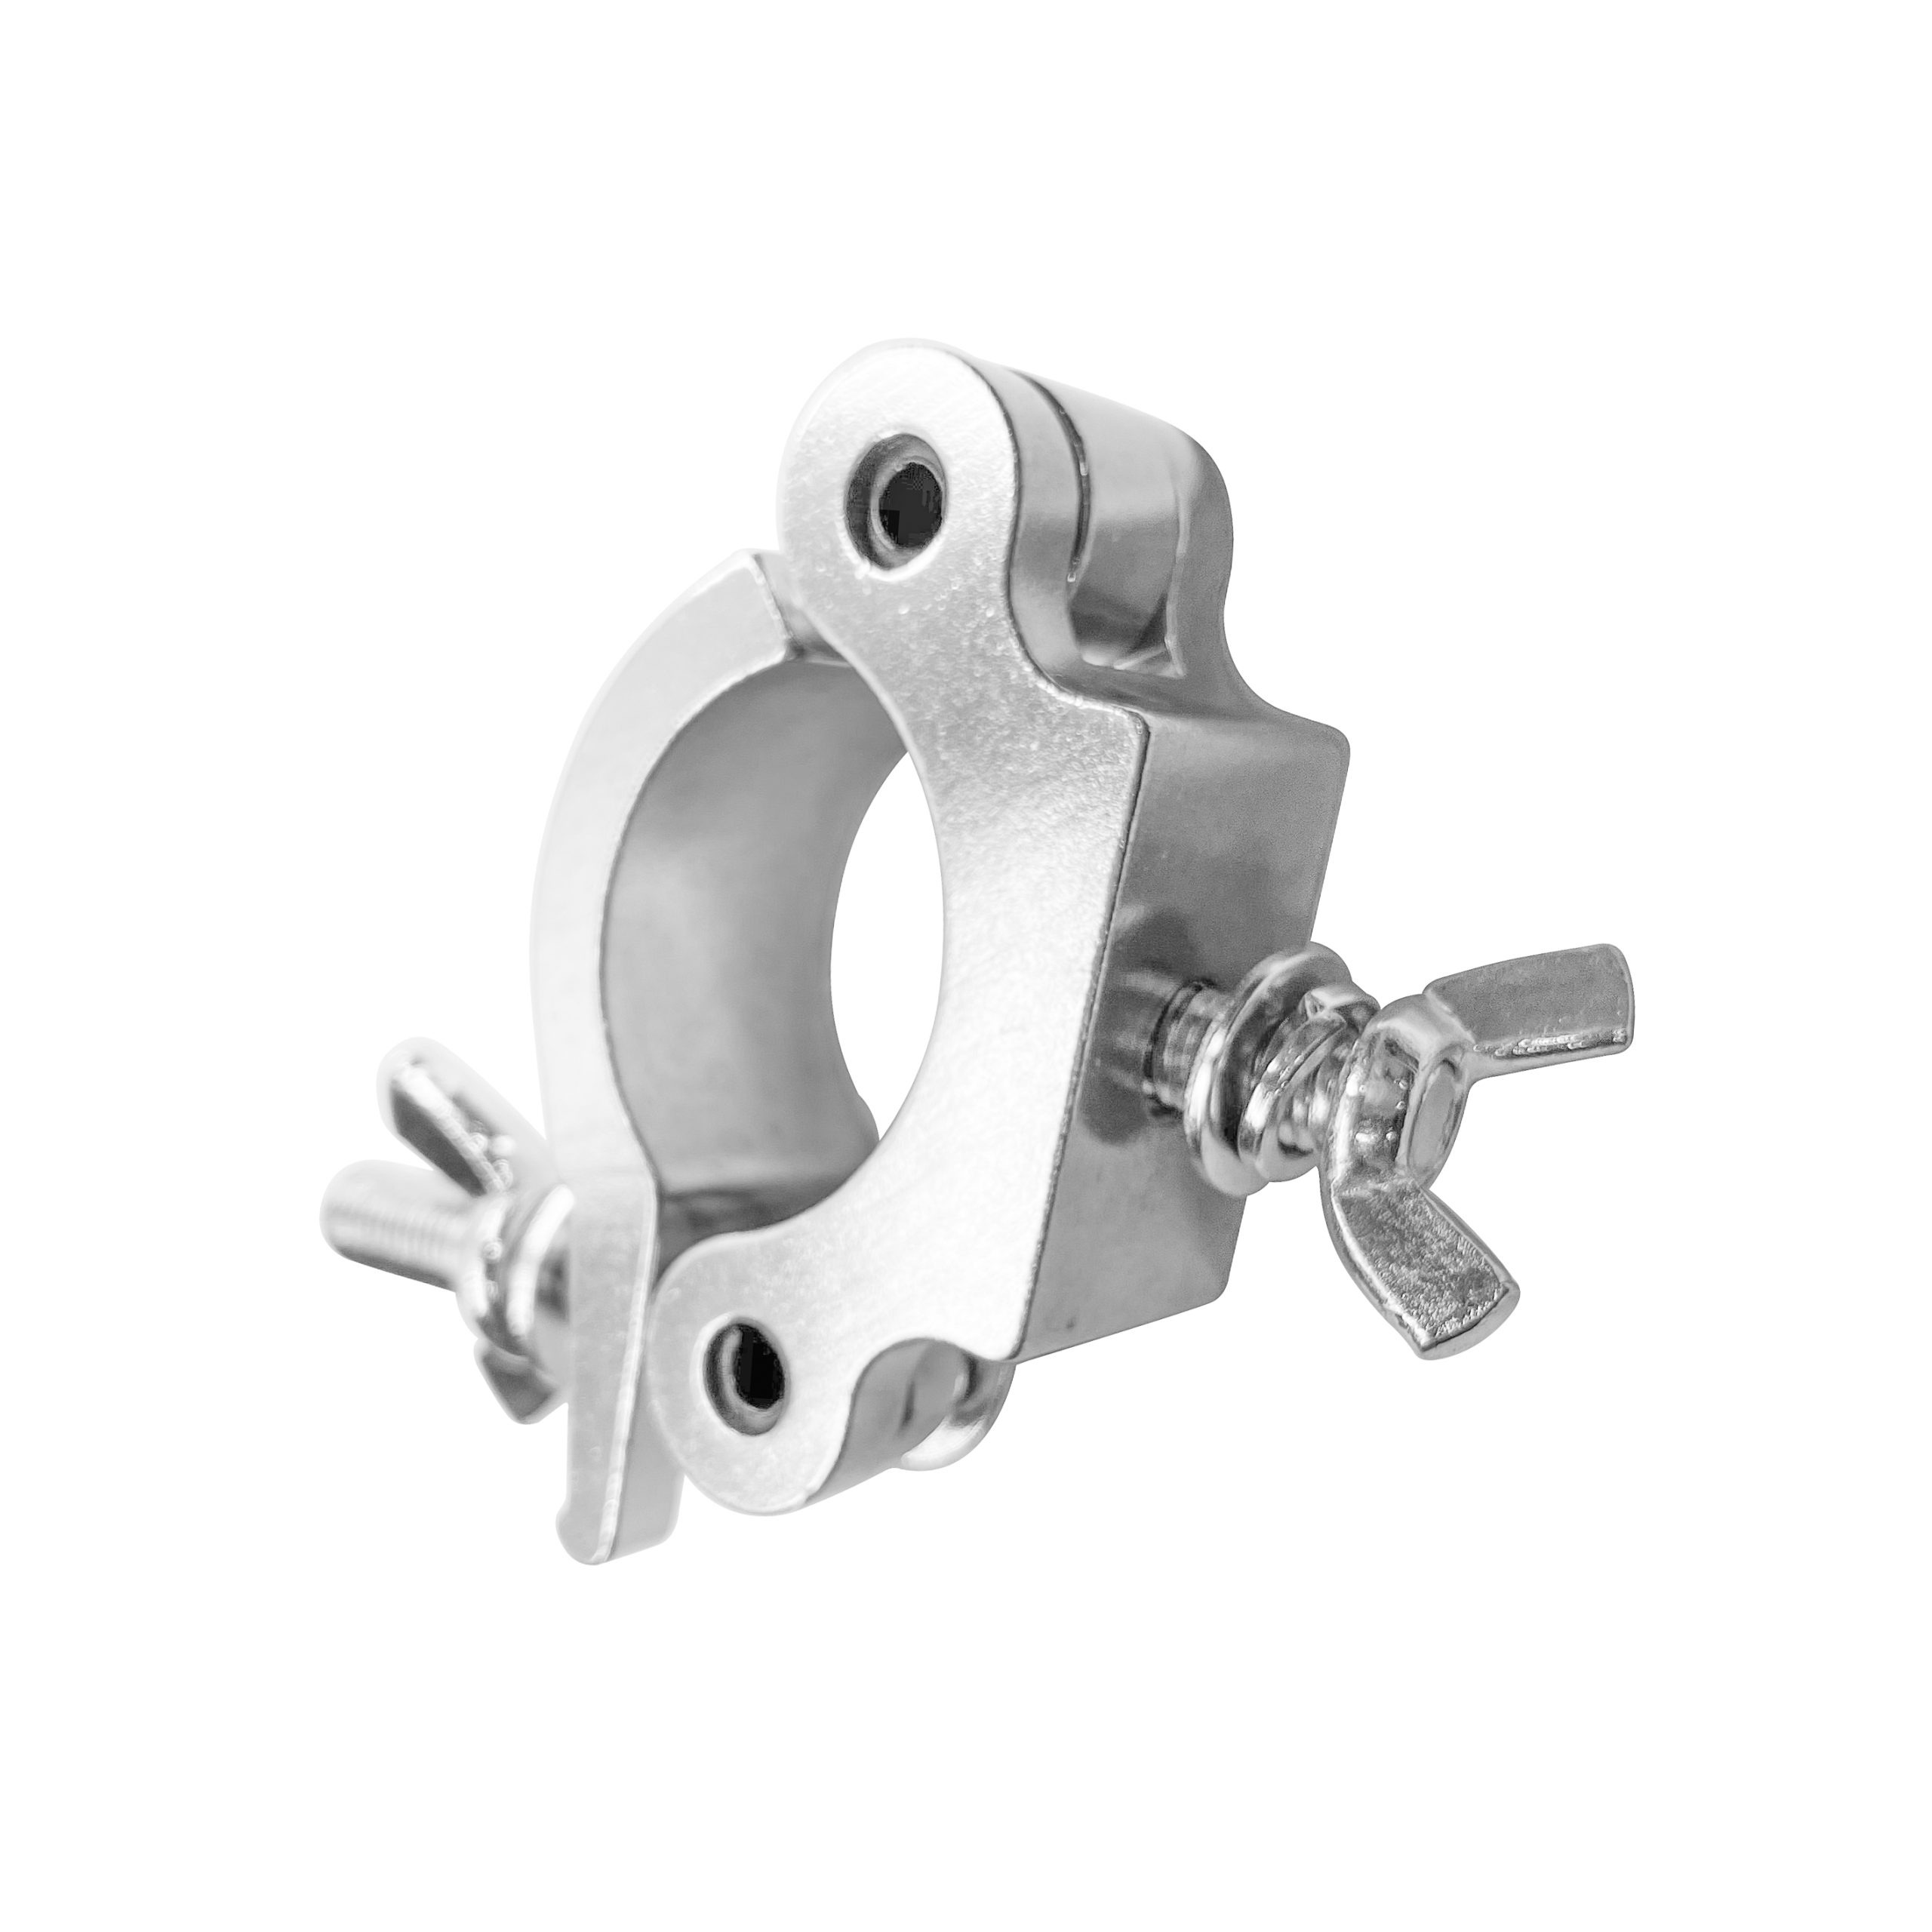 33C-113 Rod Clamp KIT: (Thick) Graphite Clamp with Side Ring, Studs, Nuts,  Wrench